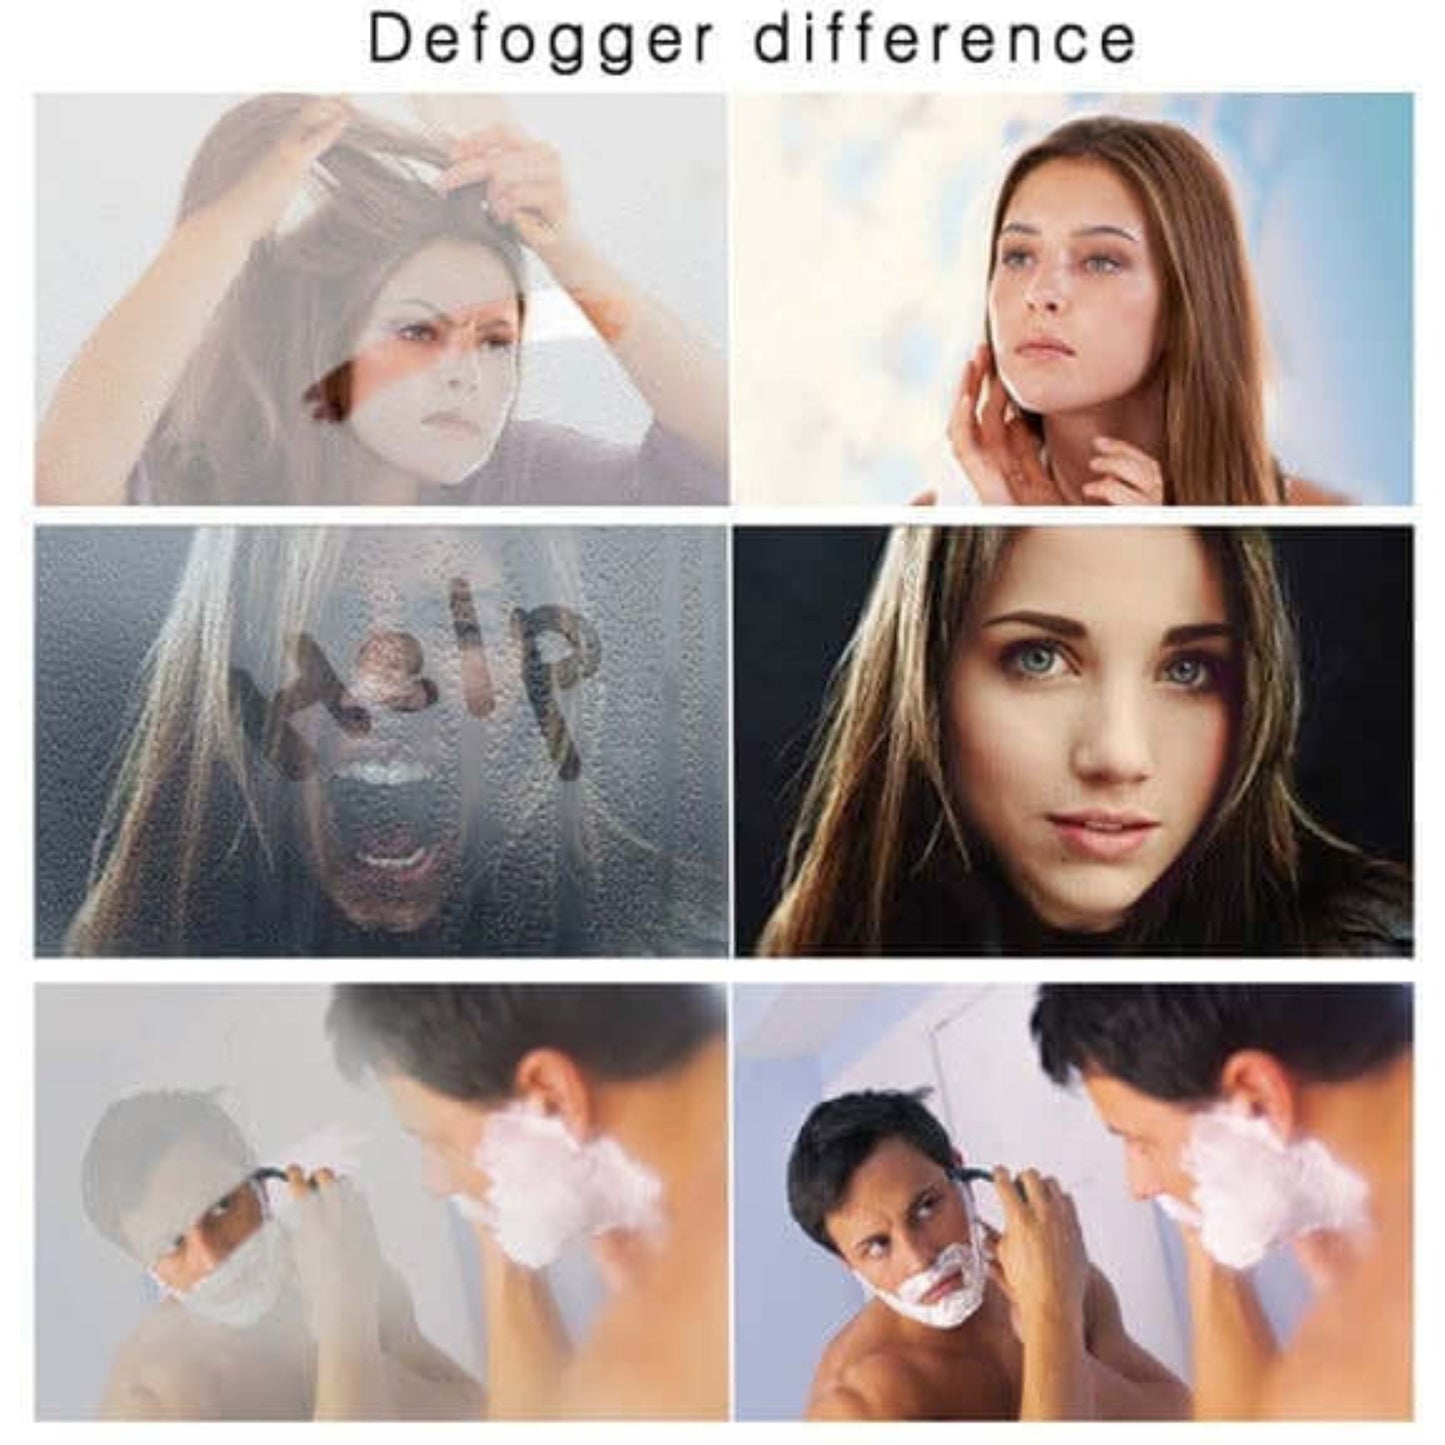 Various grooming activities reflected in the Krugg defogger picture